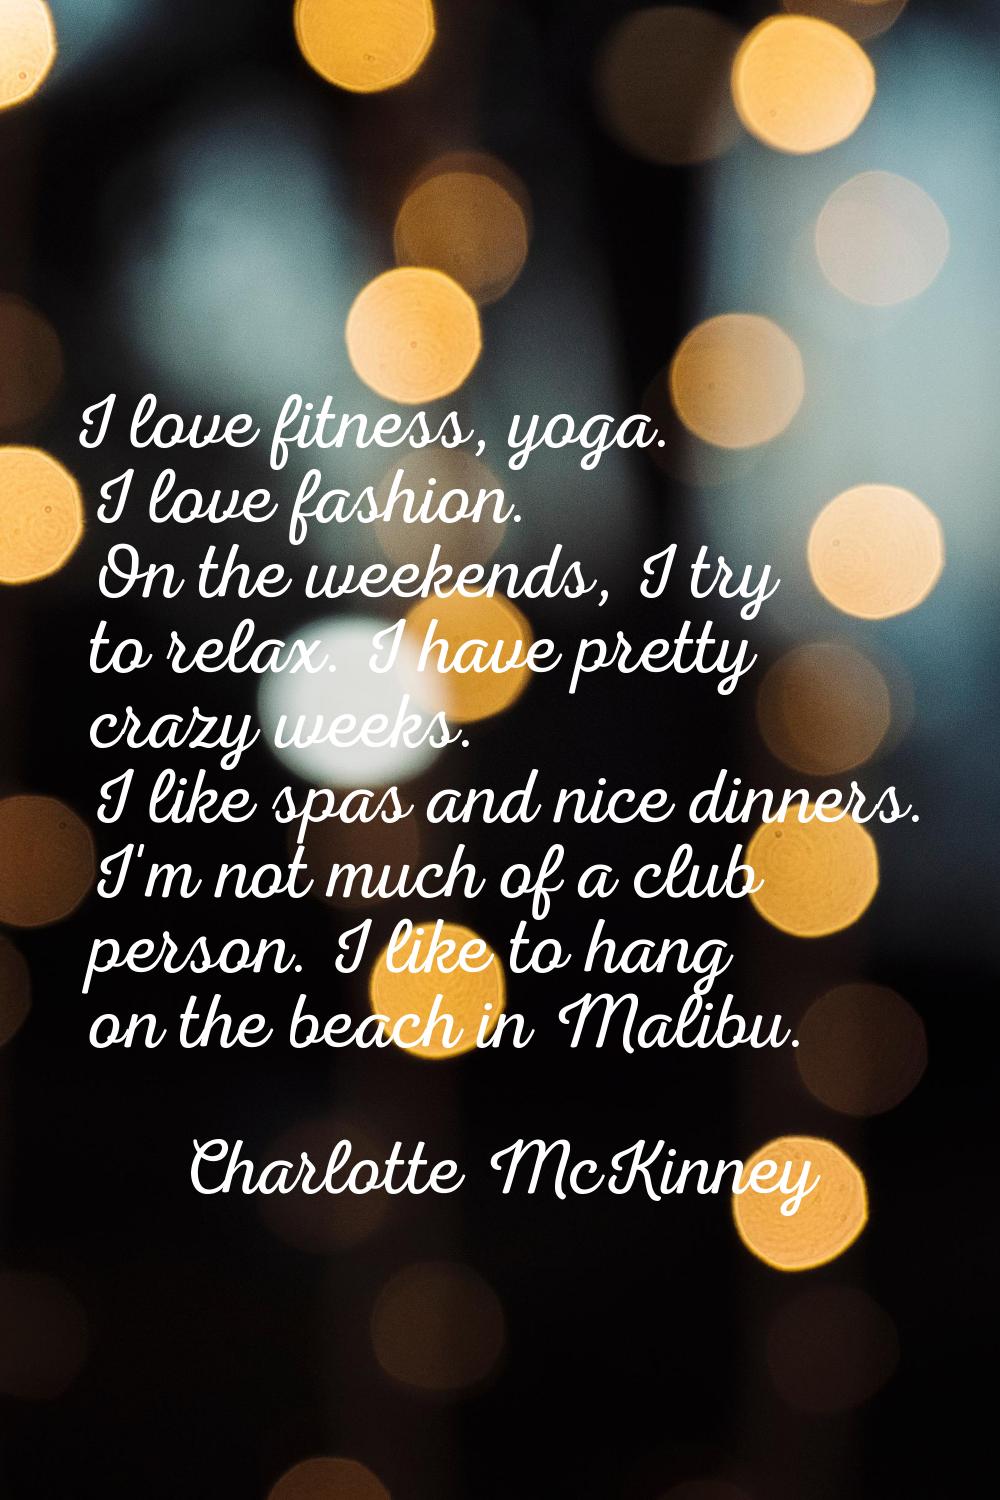 I love fitness, yoga. I love fashion. On the weekends, I try to relax. I have pretty crazy weeks. I